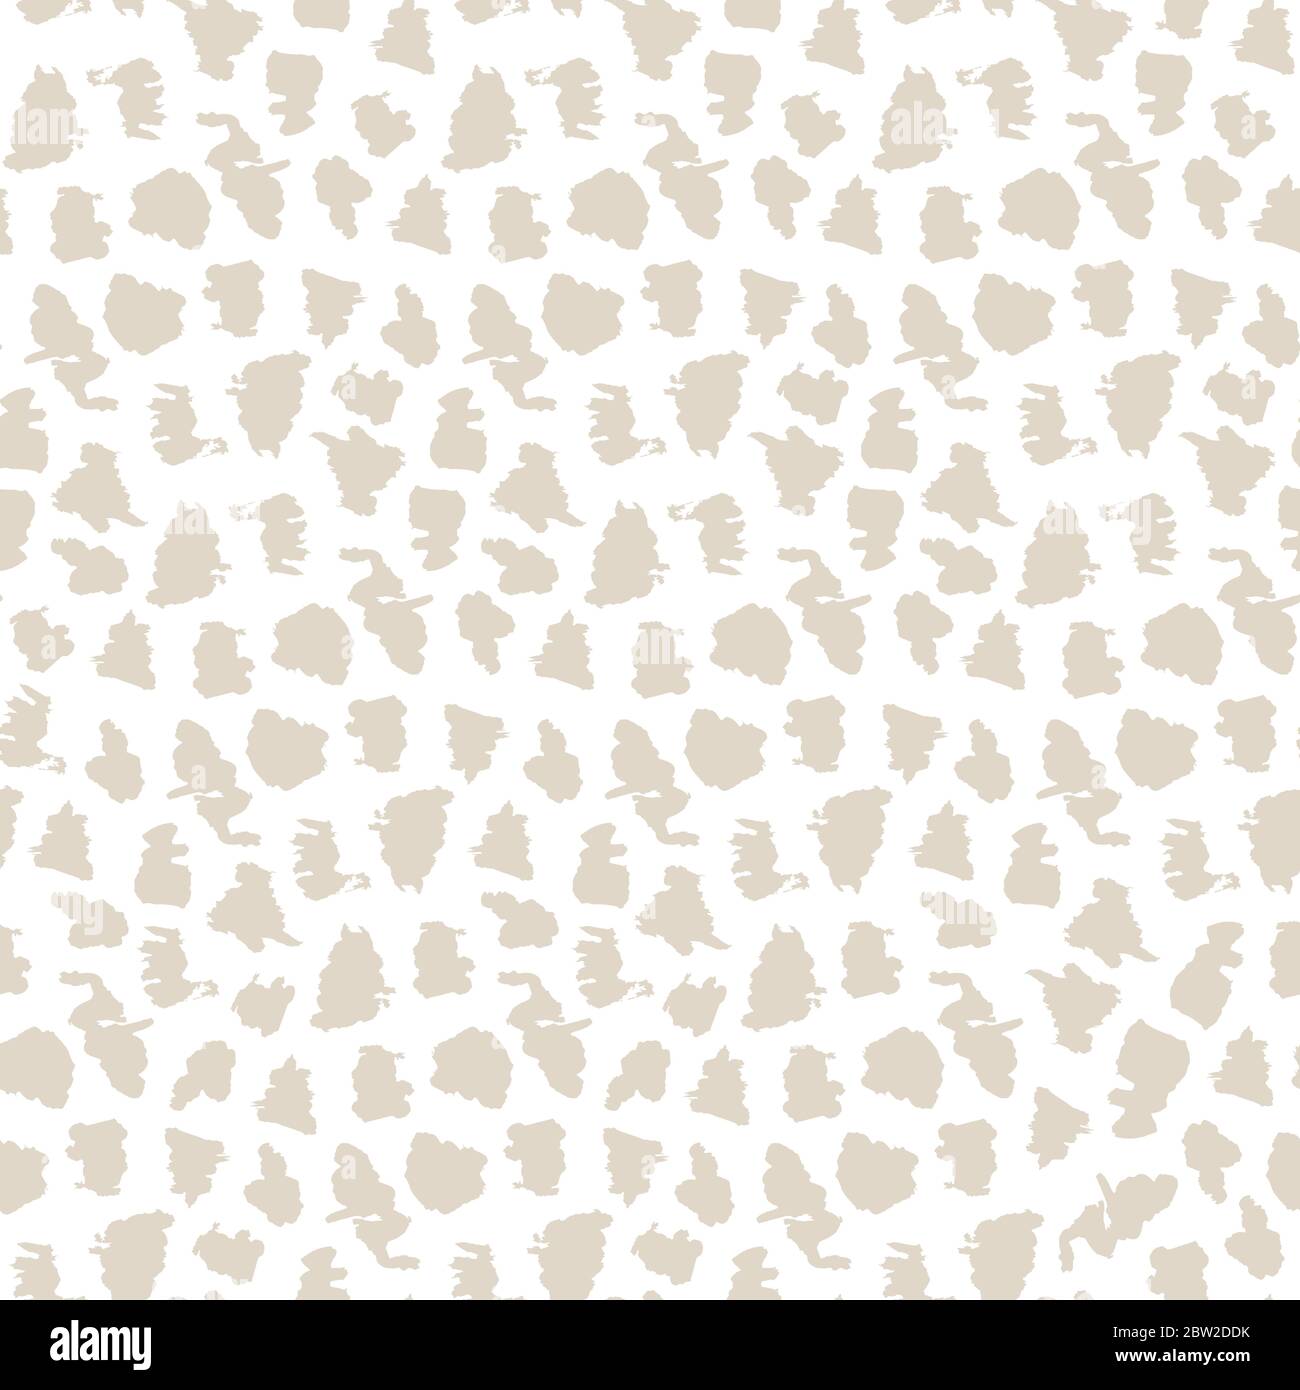 Abstract minimalistic seamless pattern animal skin. Safari seamless pattern background tiger skin animal print. Vector wallpaper design with pastel neutral colors Stock Vector